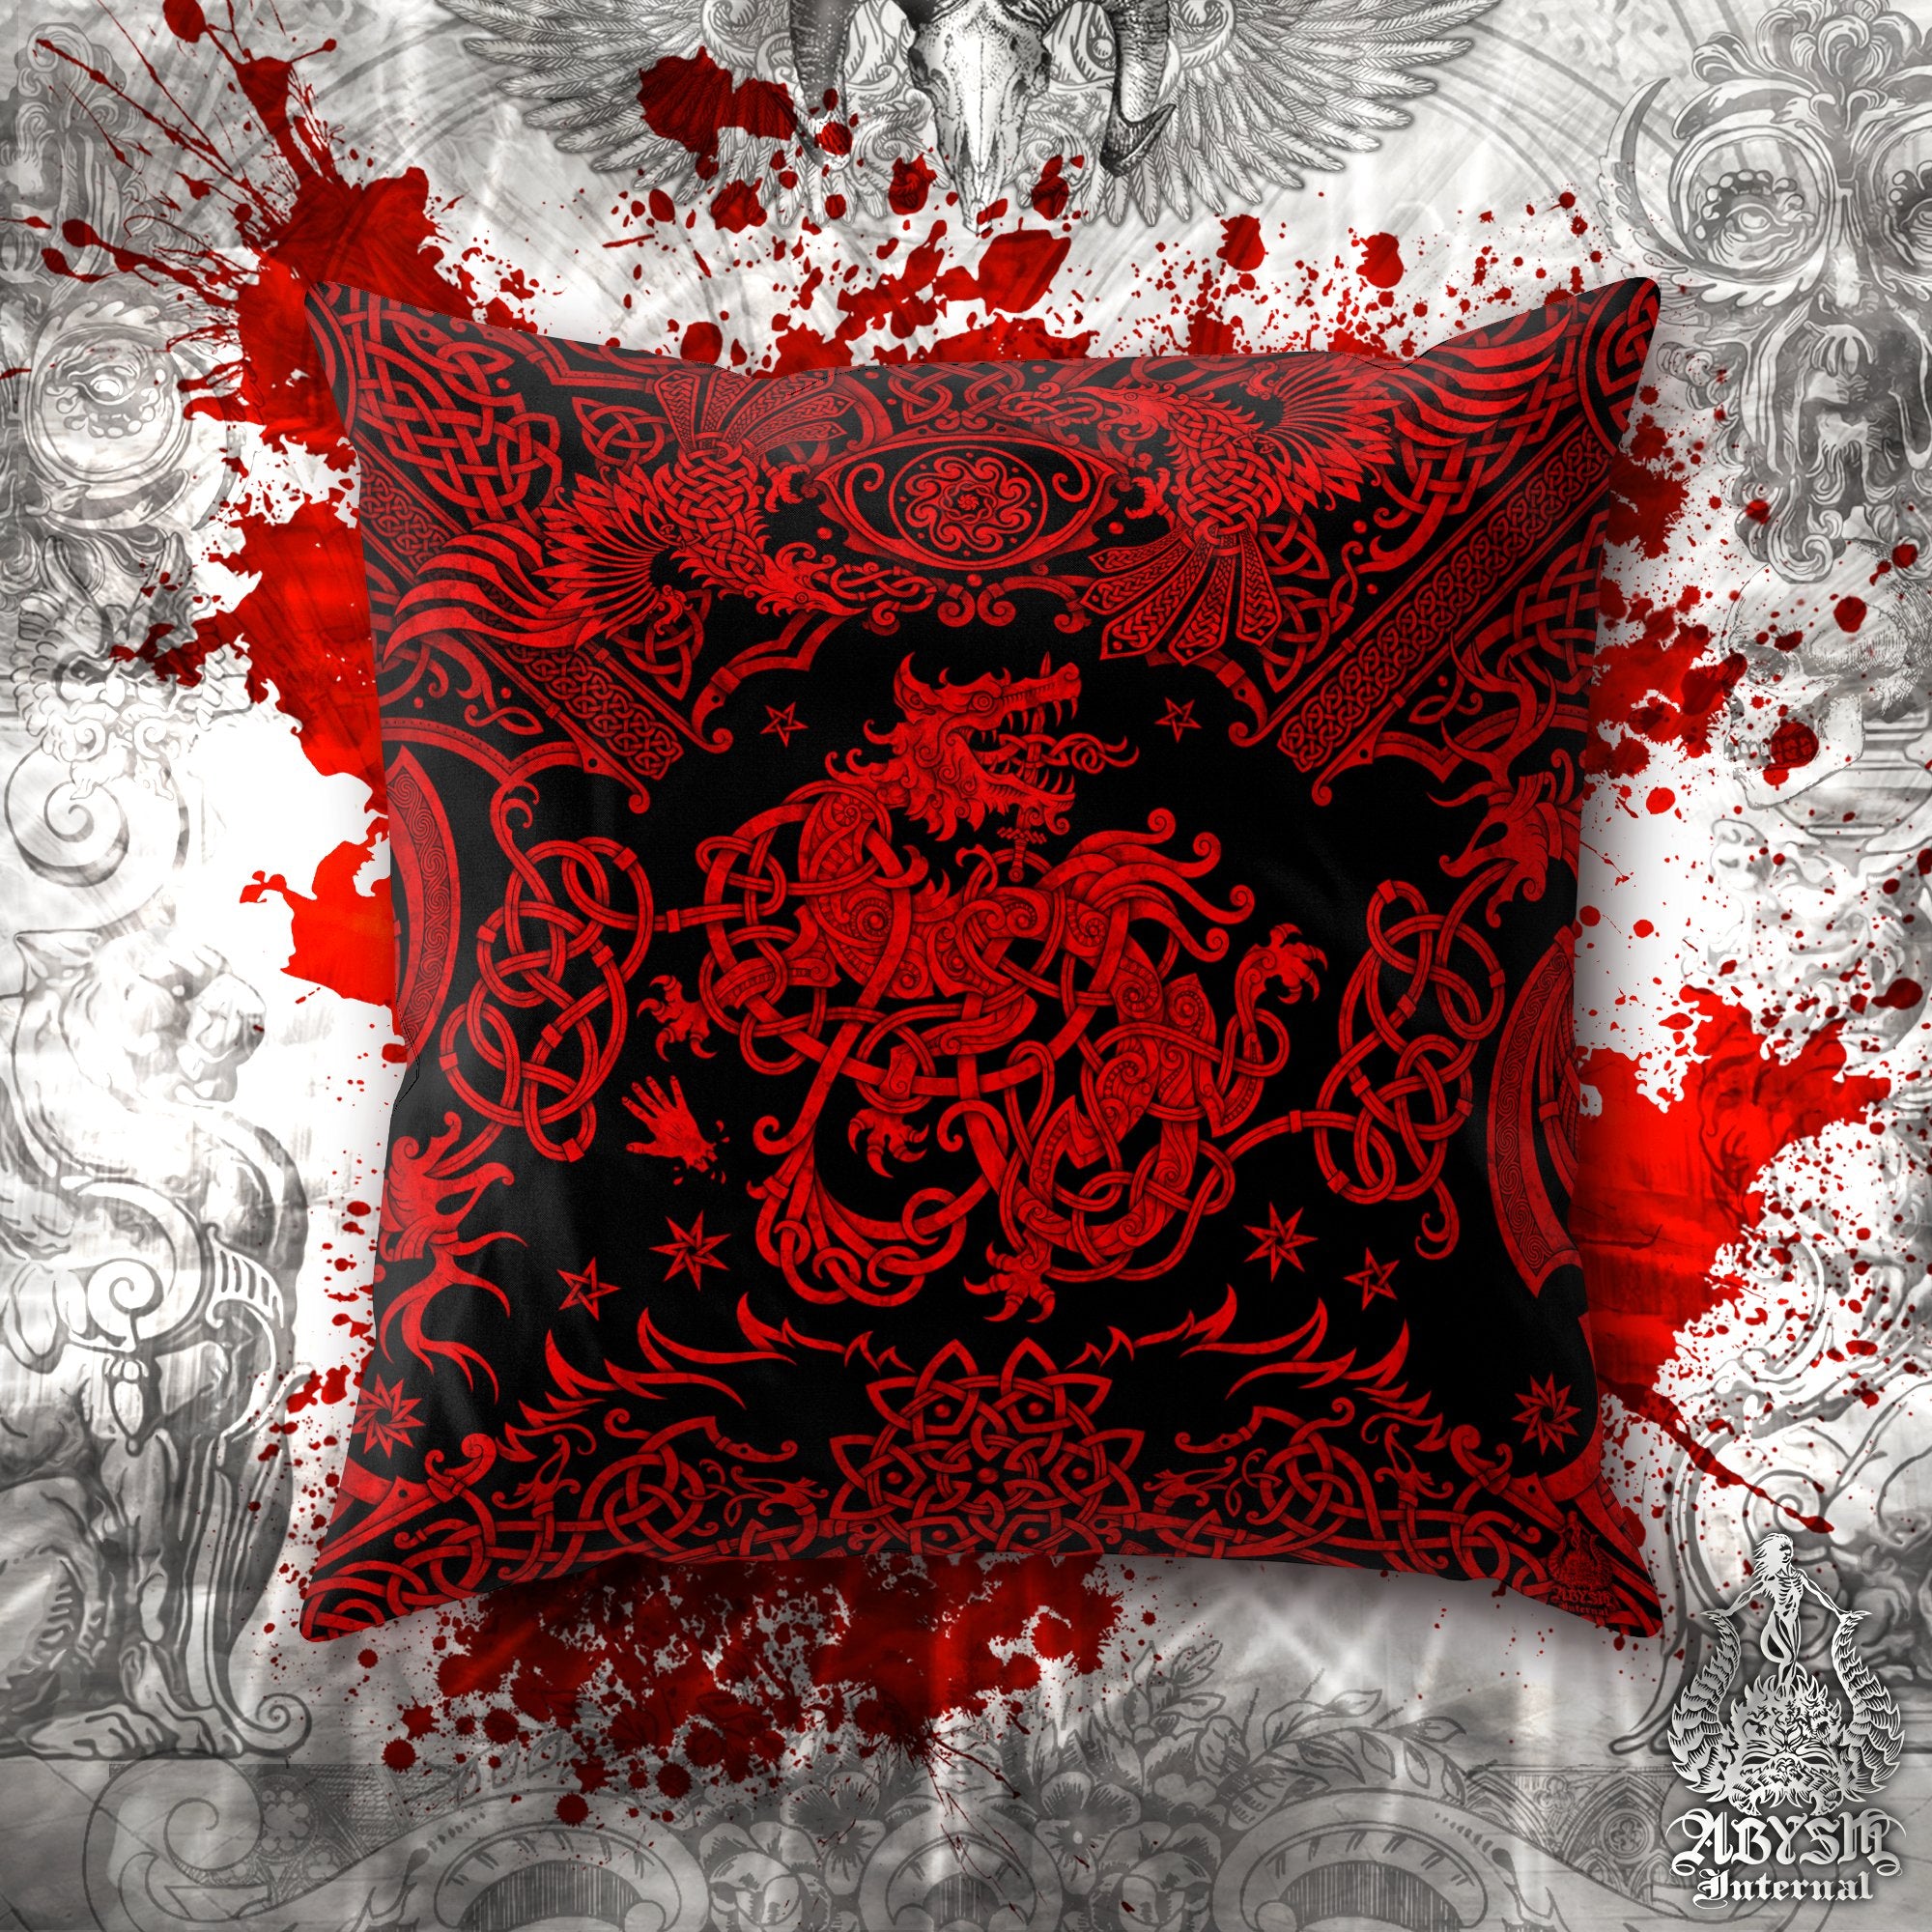 Viking Wolf Throw Pillow, Decorative Accent Pillow, Square Cushion Cover, Norse Room Decor, Fenrir Knotwork, Nordic Art, Alternative Home - Black and Red - Abysm Internal